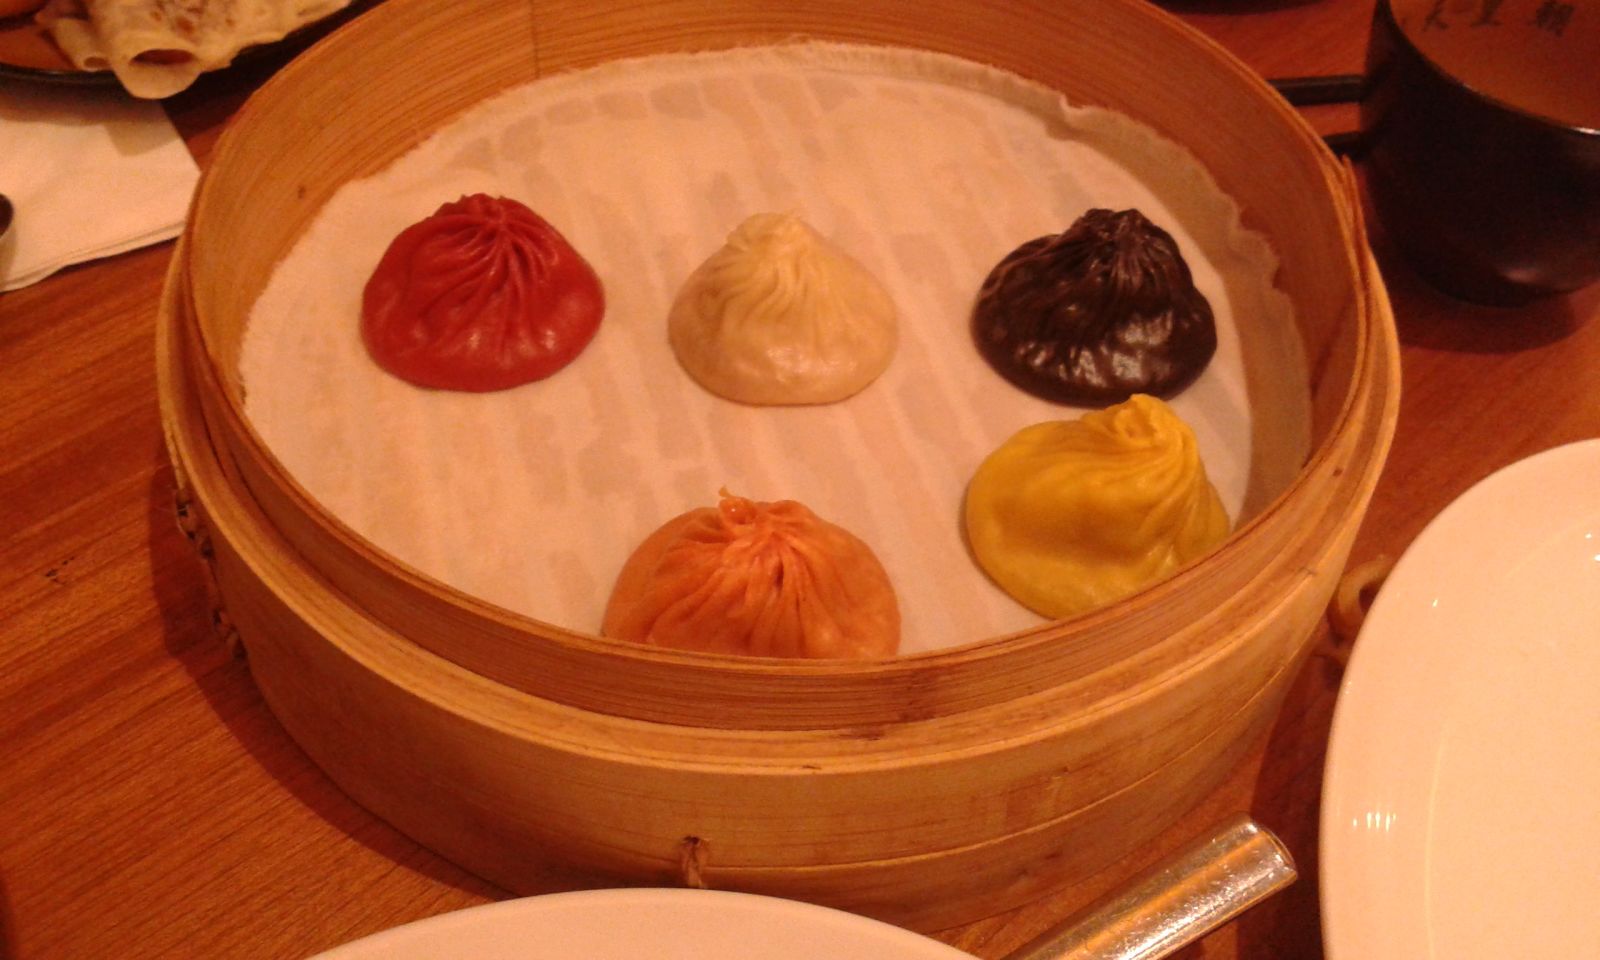 Took a picture of what’s left on the Xiao Long Bao